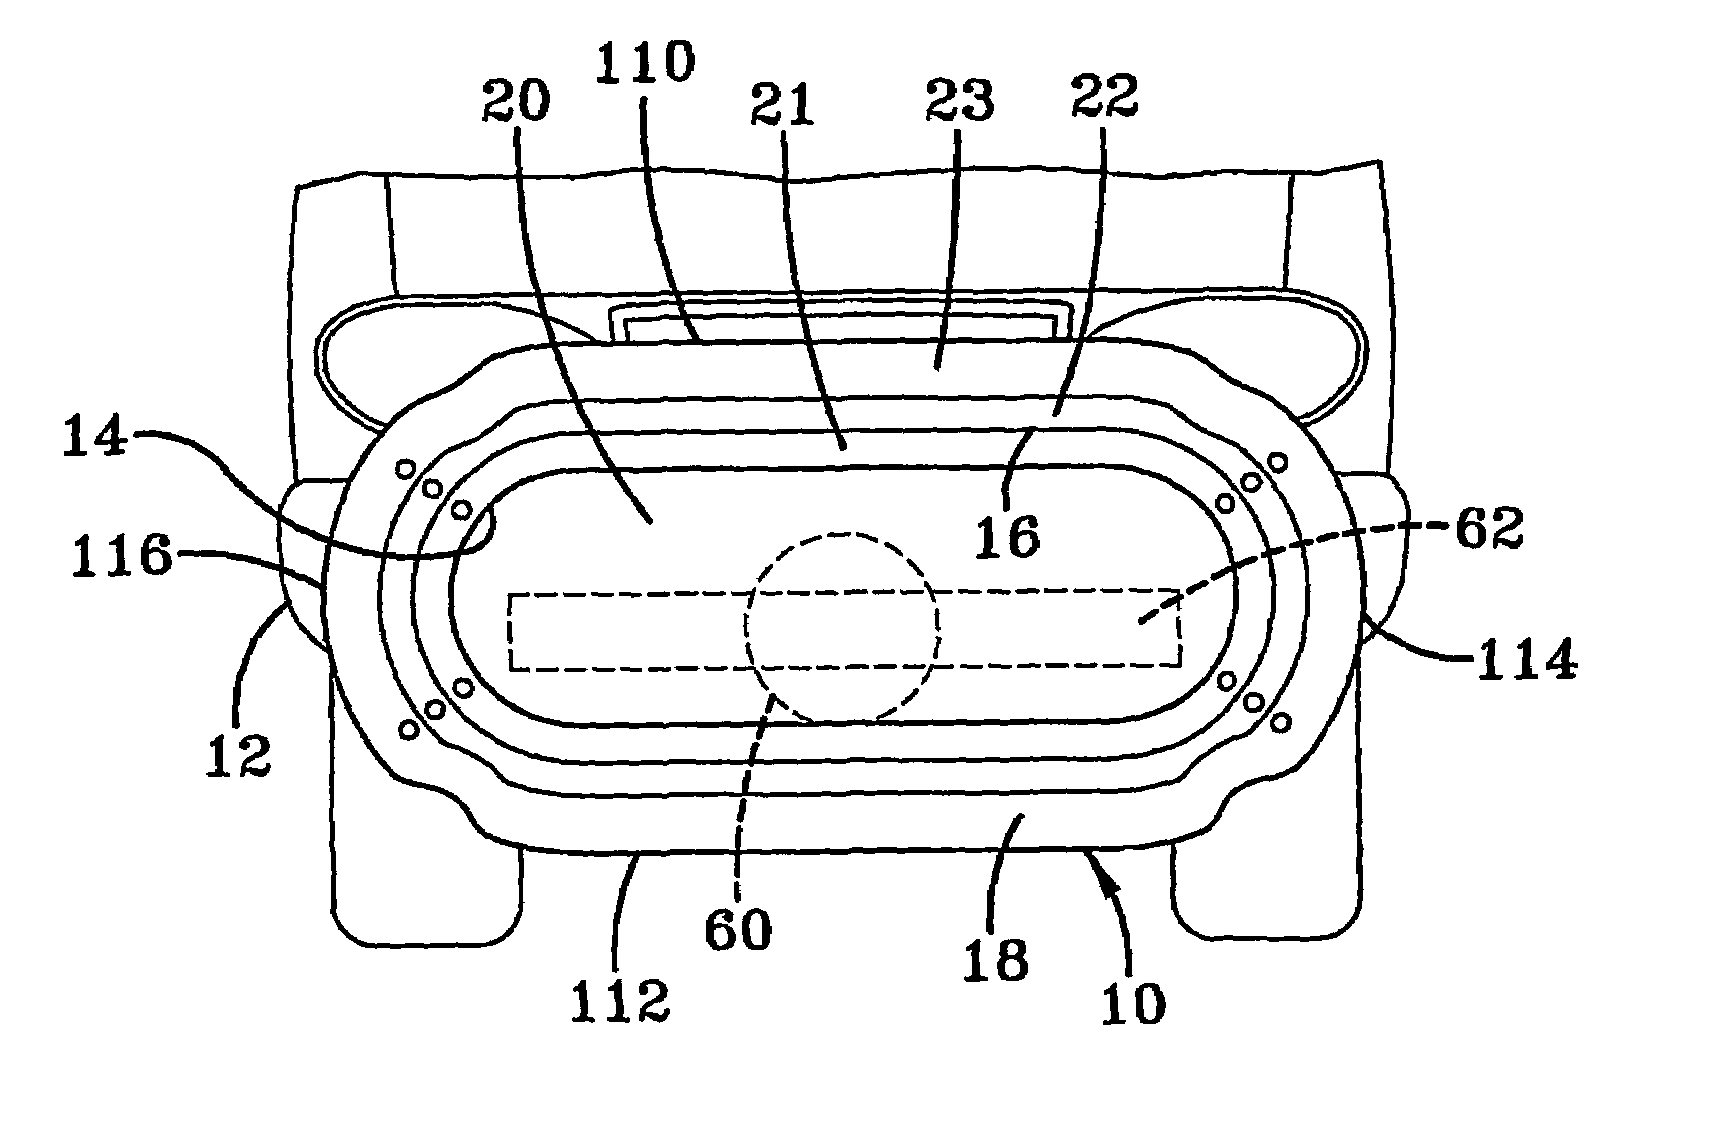 Bumper airbag with multiple chambers